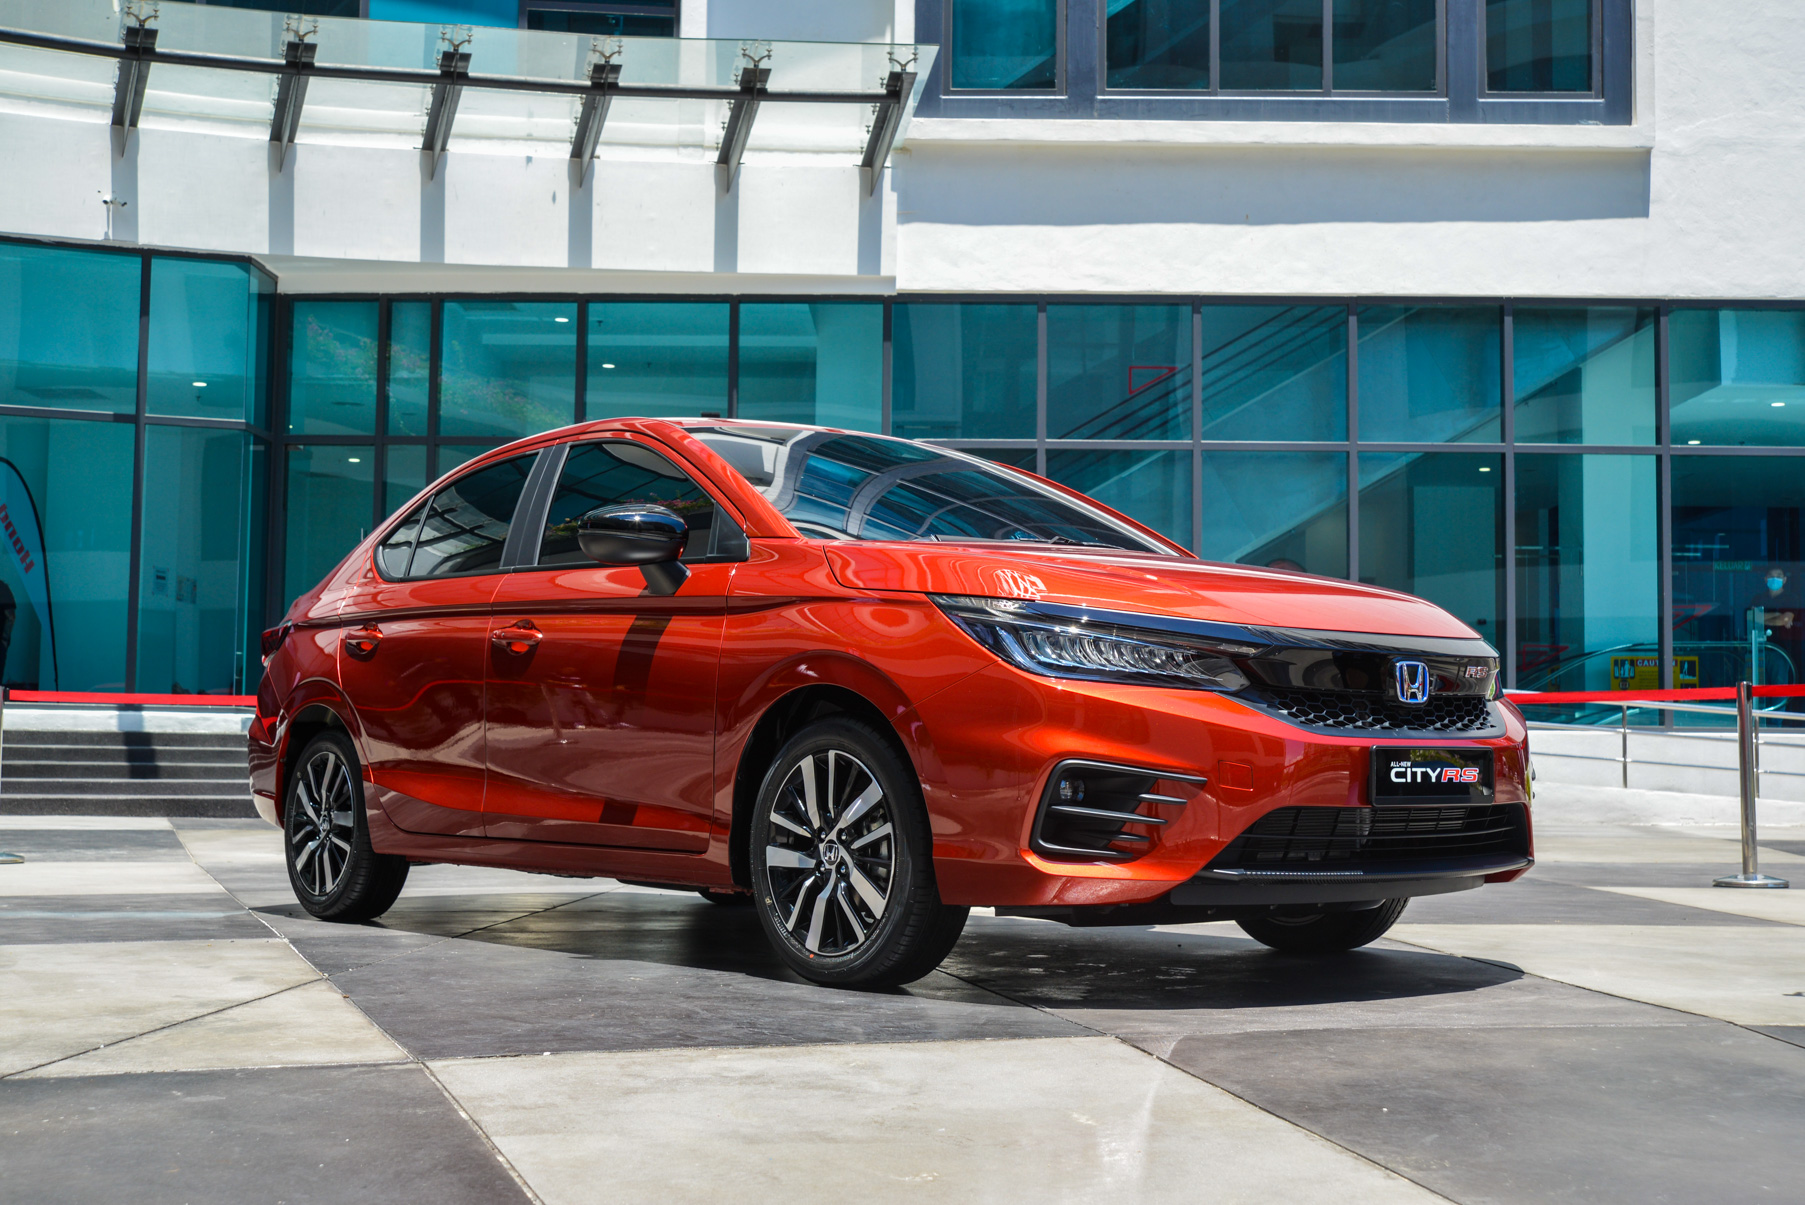 Confirmed: the 2021 Honda City RS costs more than a Proton X50 Flagship